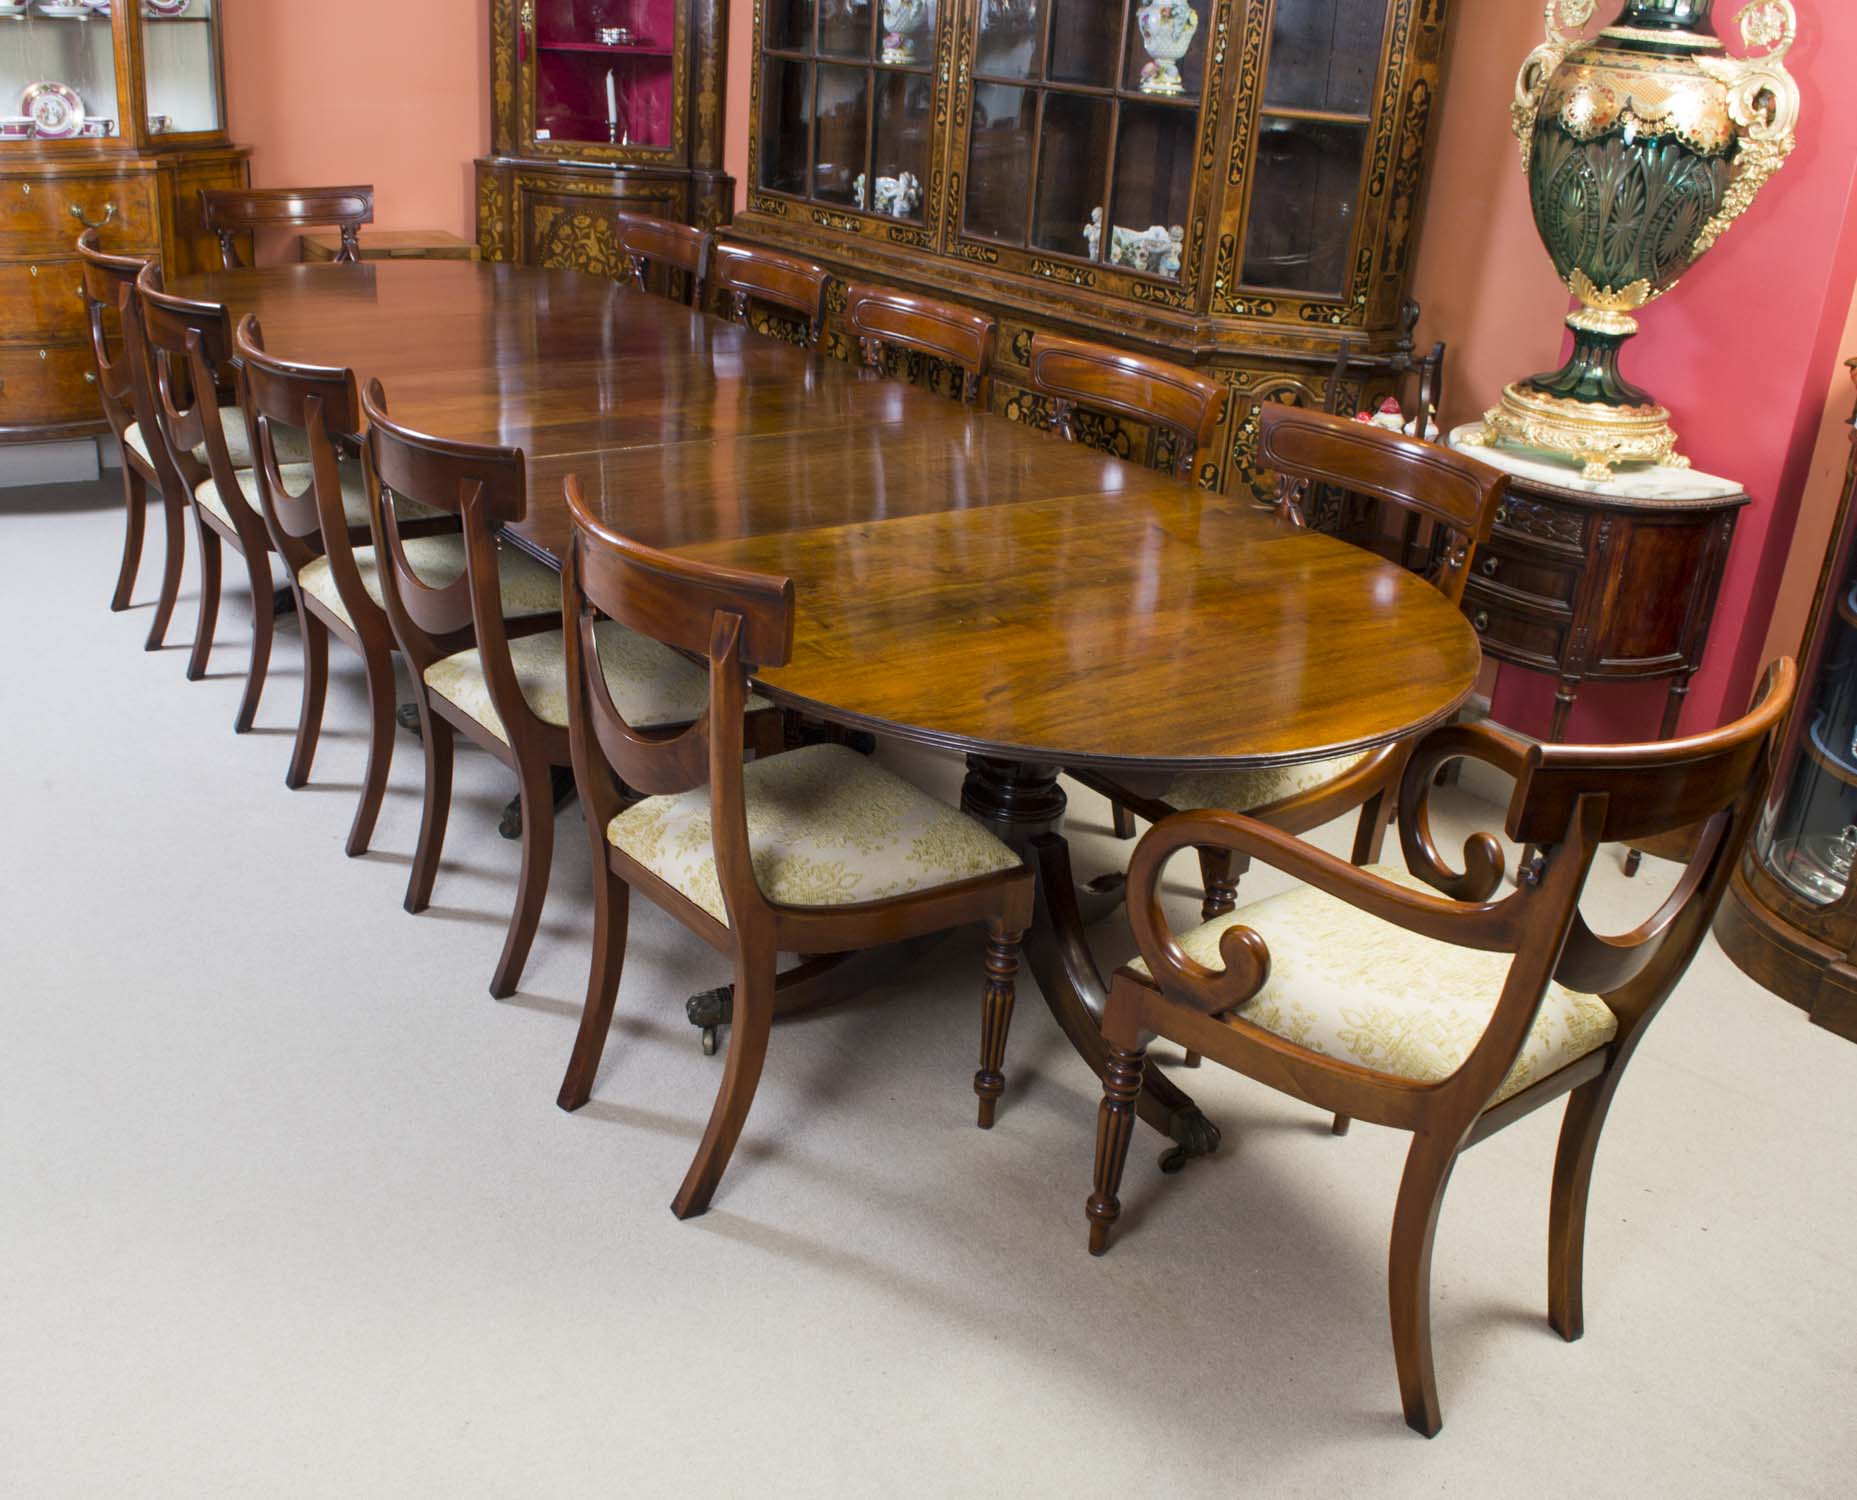 Antique Regency Mahogany Ref No, Regency Style Dining Table And Chairs